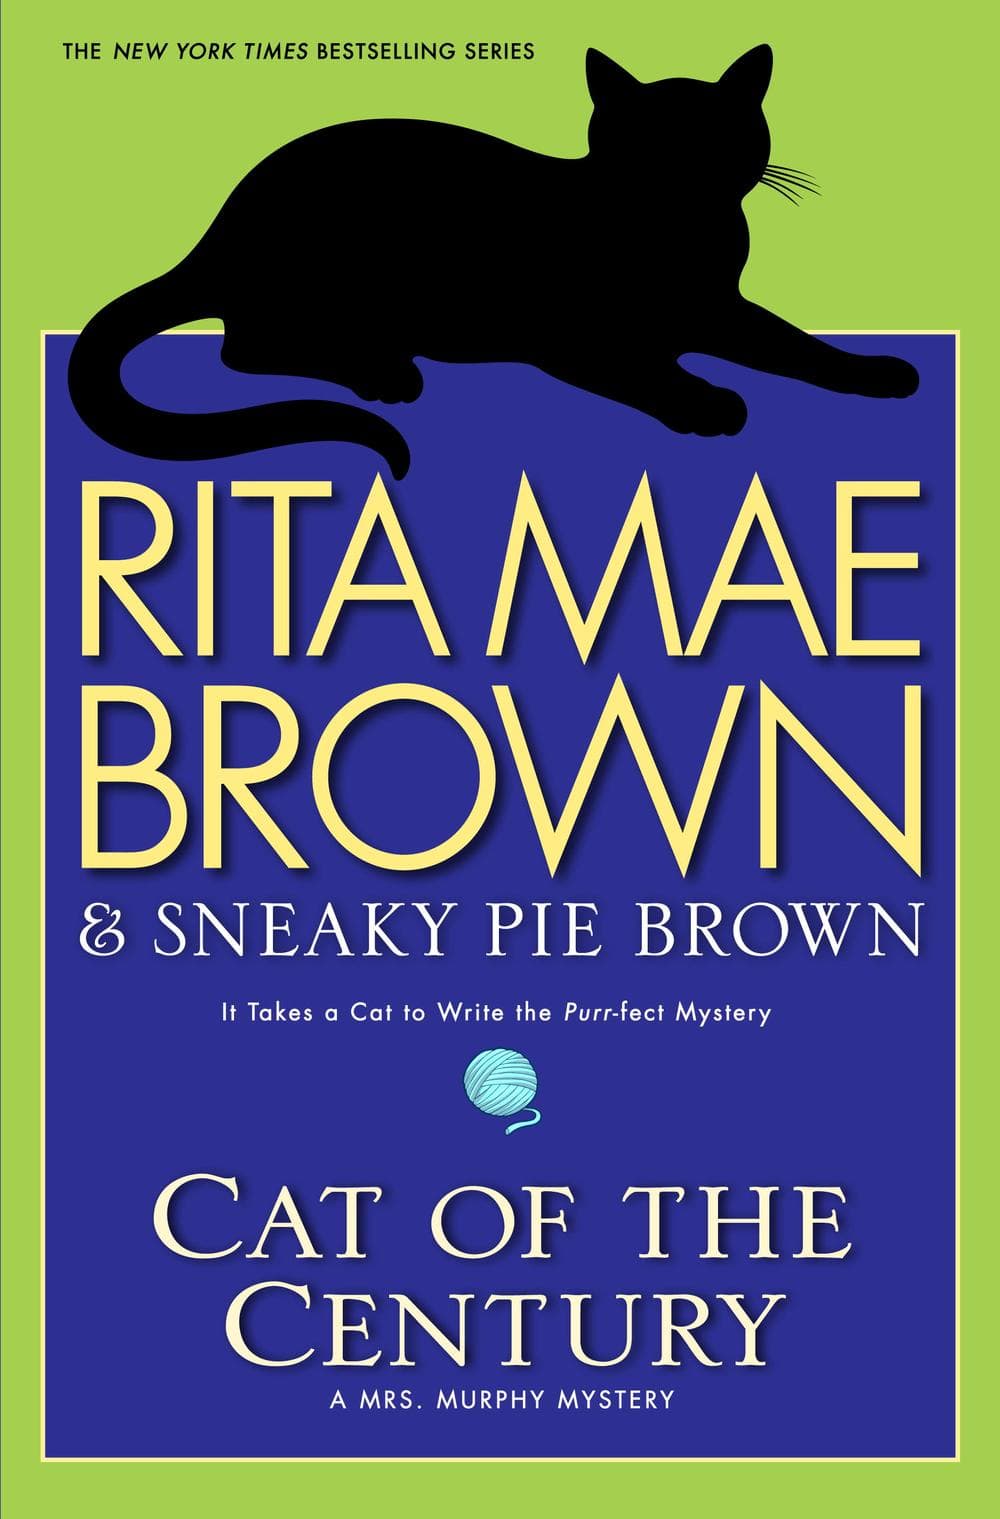 Cover image from Rita Mae Brown&#039;s &quot;Cat of the Century.&quot;